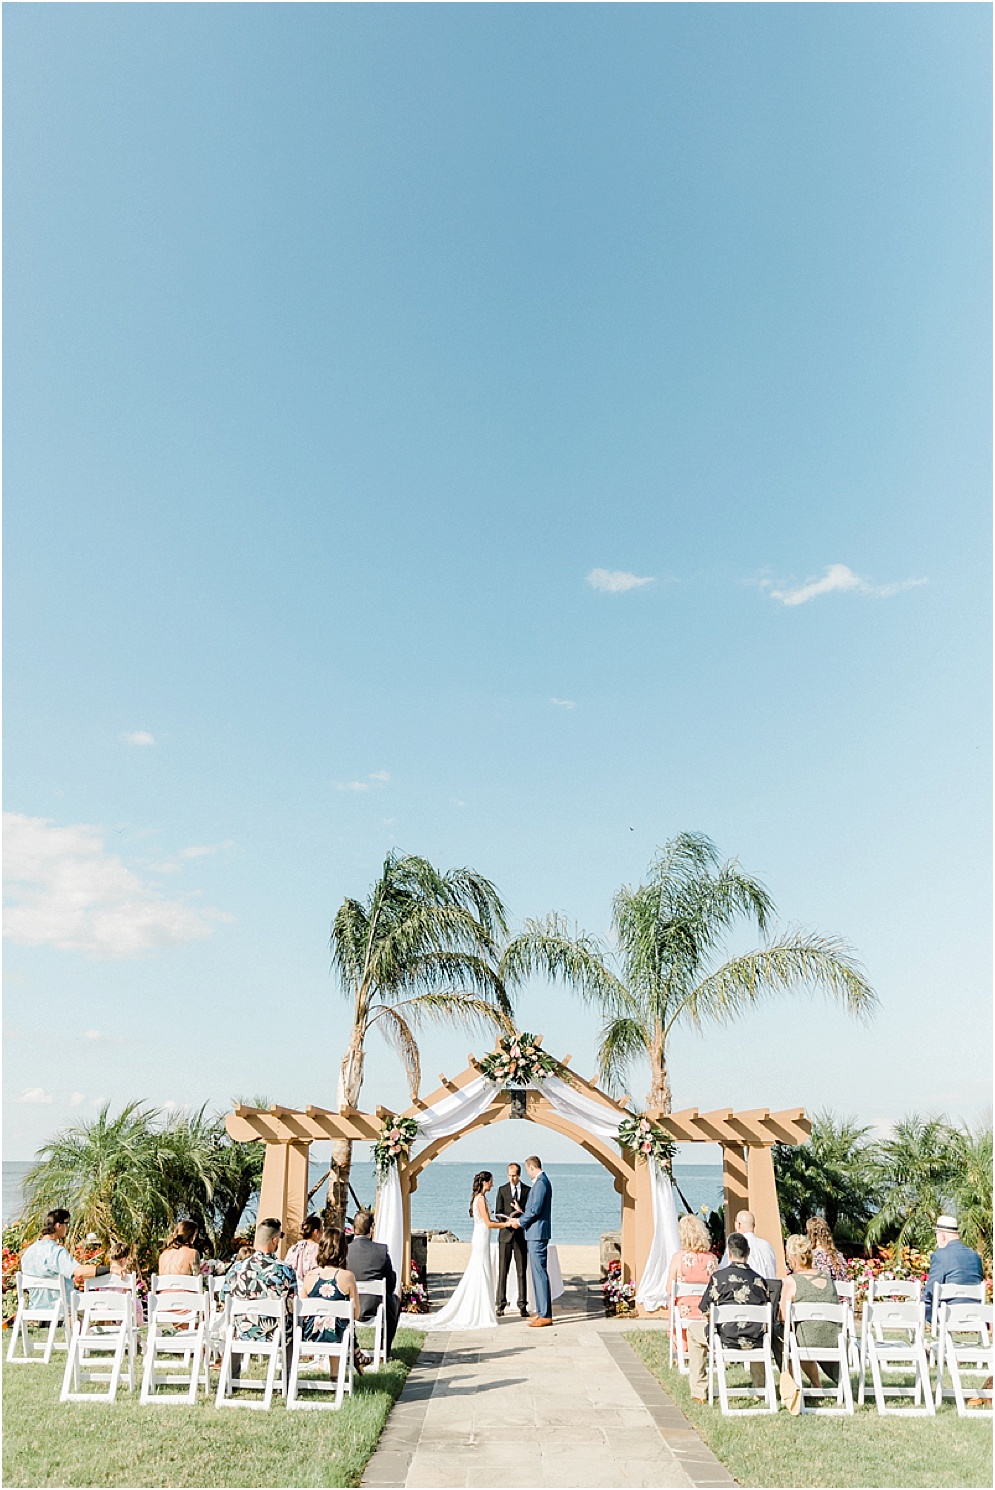 A colorful, island inspired wedding at Herrington on the Bay.